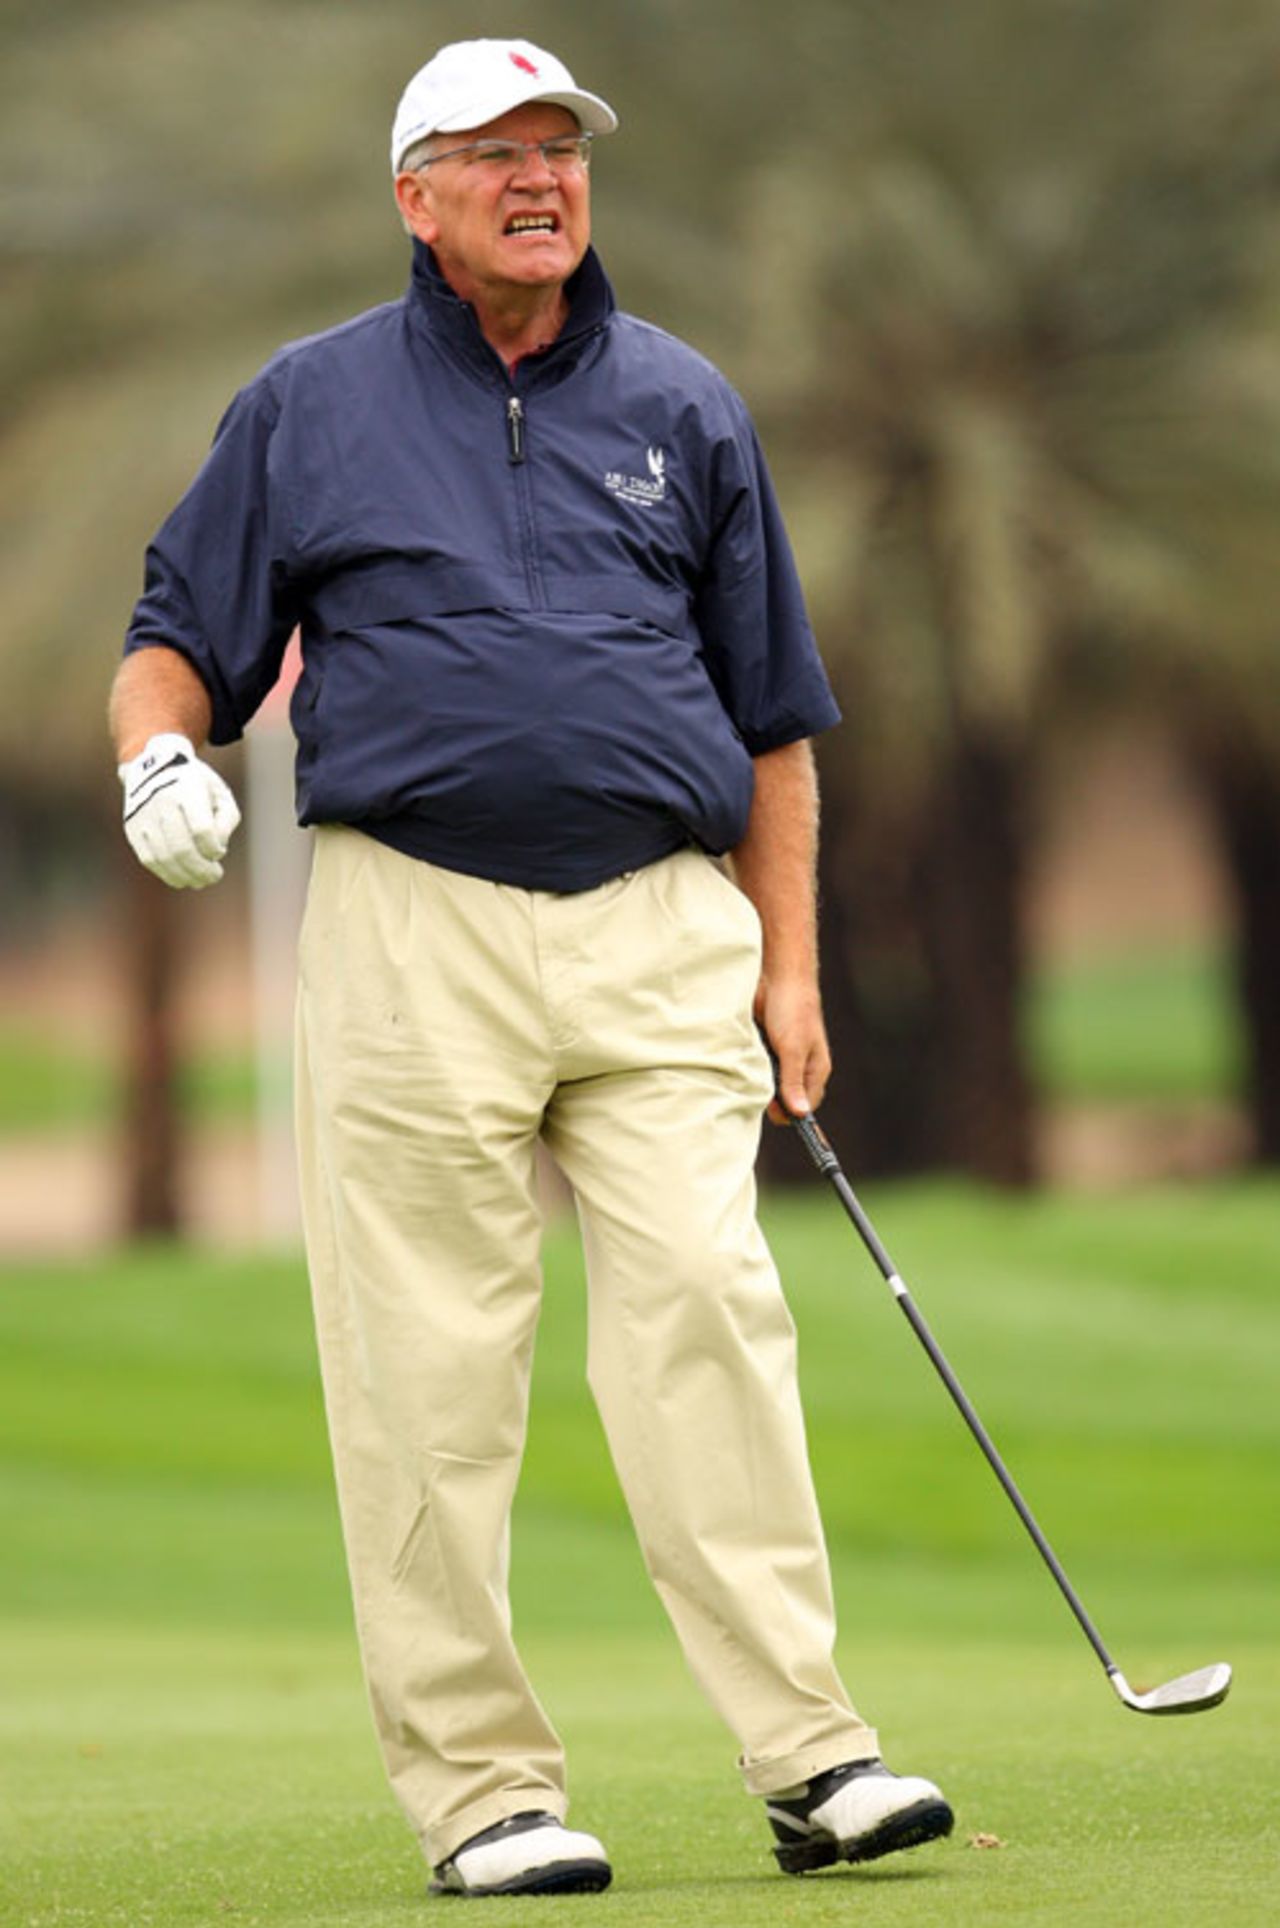 Malcolm Speed watches his shot during the Pro Am at the Abu Dhabi Golf Championship at Abu Dhabi Golf Club, January 16, 2008